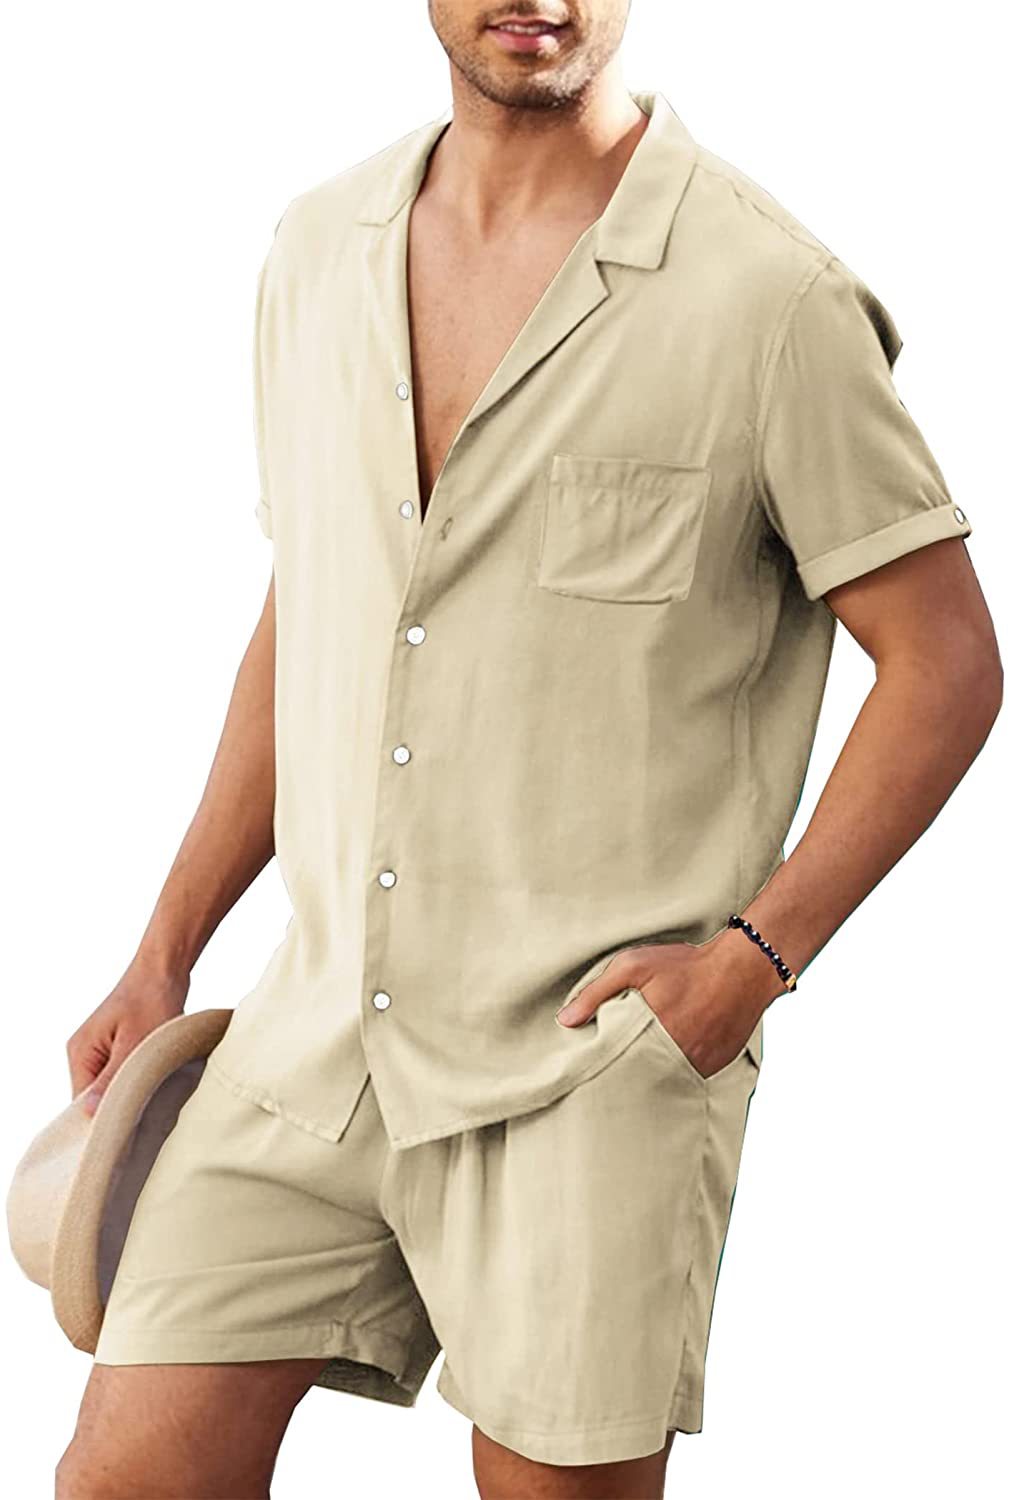 Casual Summer Men's Short Sleeves T Shirts and Shorts-Suits-Off the White-M-Free Shipping at meselling99